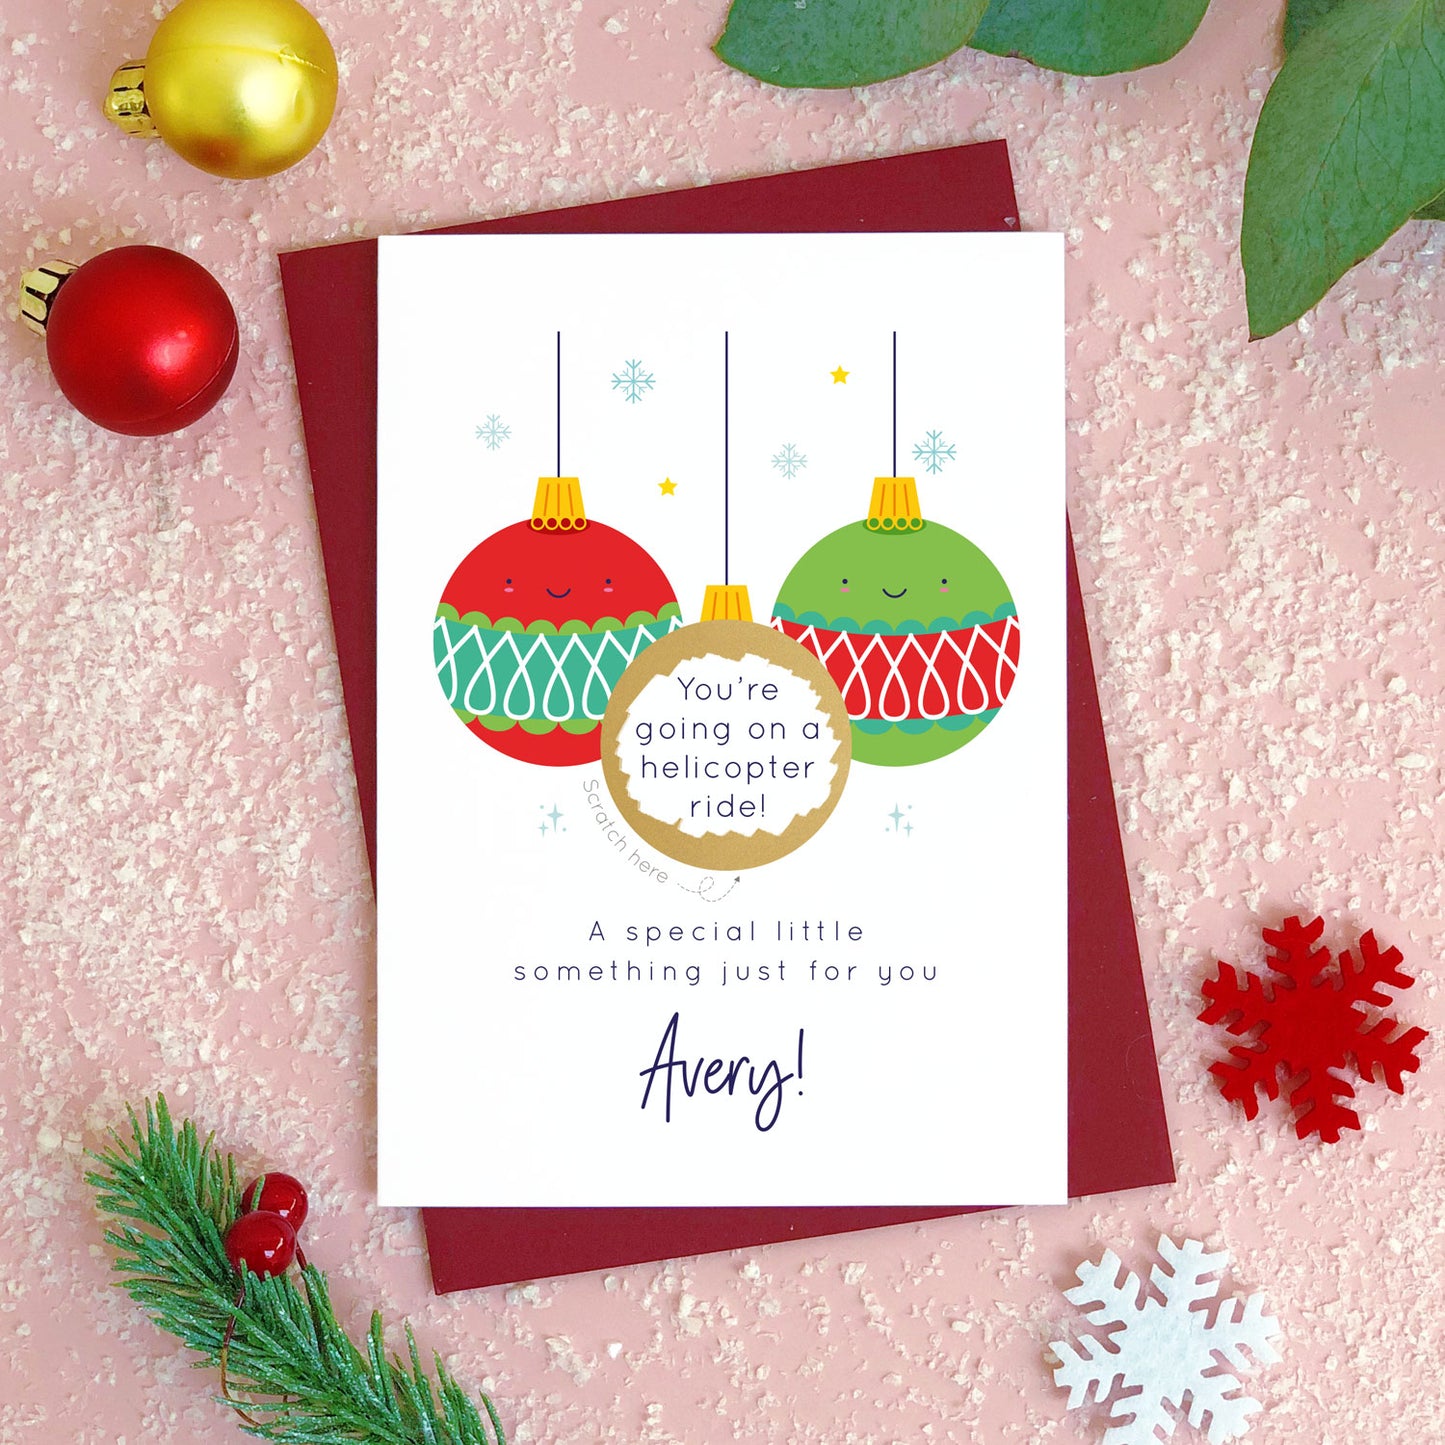 A personalised Christmas bauble scratch card photographed flat lying on a red wine coloured envelope on a pink surface surrounded by fake snow, baubles and foliage. The card is the green bauble version and the gold panel has been scratched off to reveal the custom message.